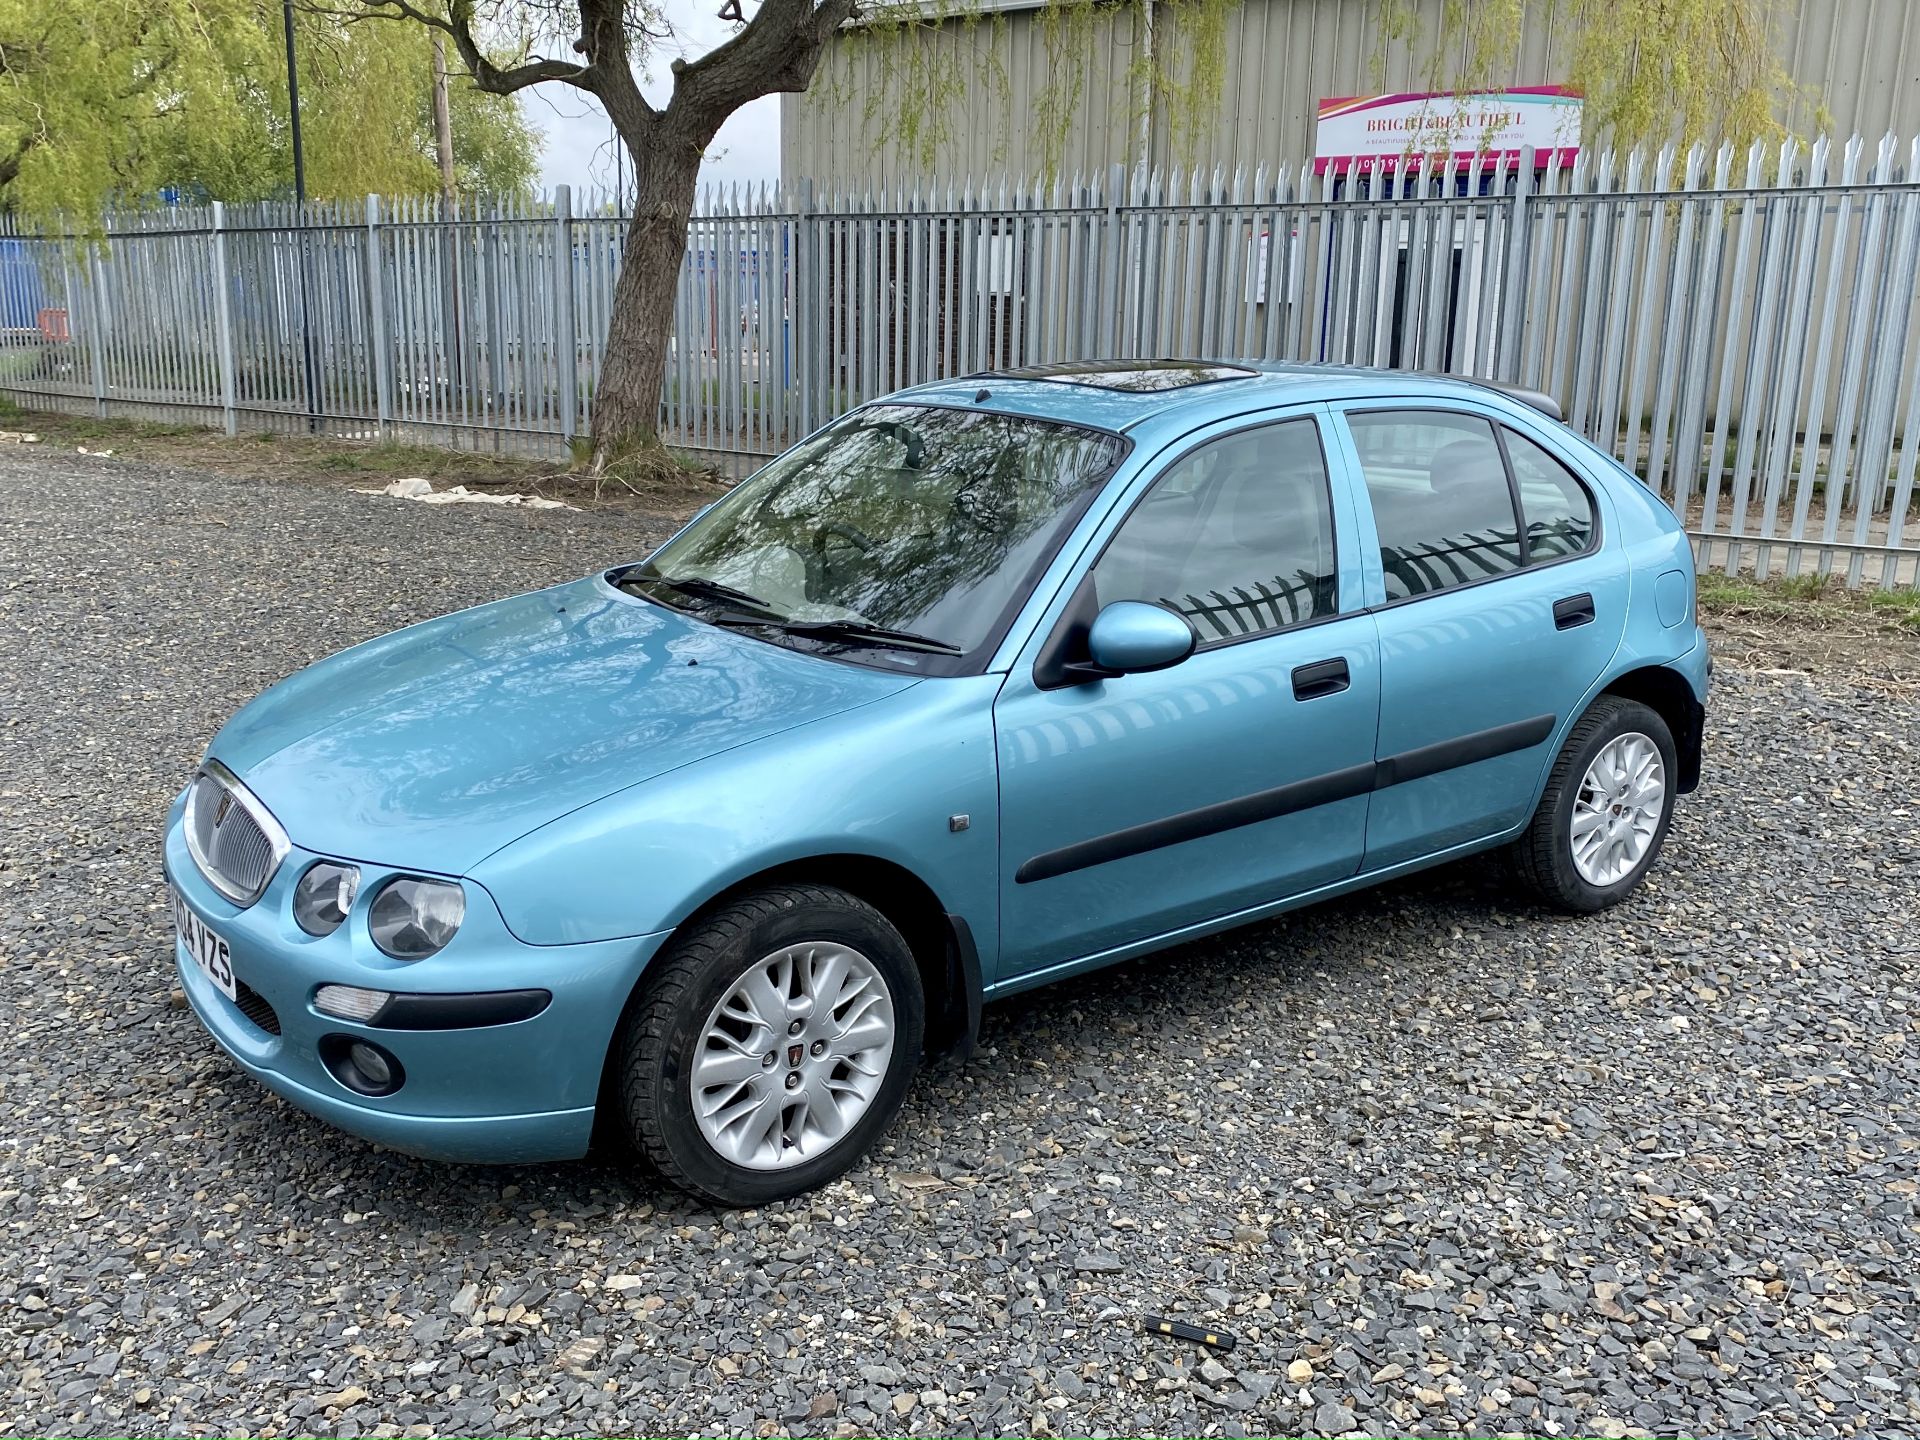 Rover 25 - Image 10 of 36